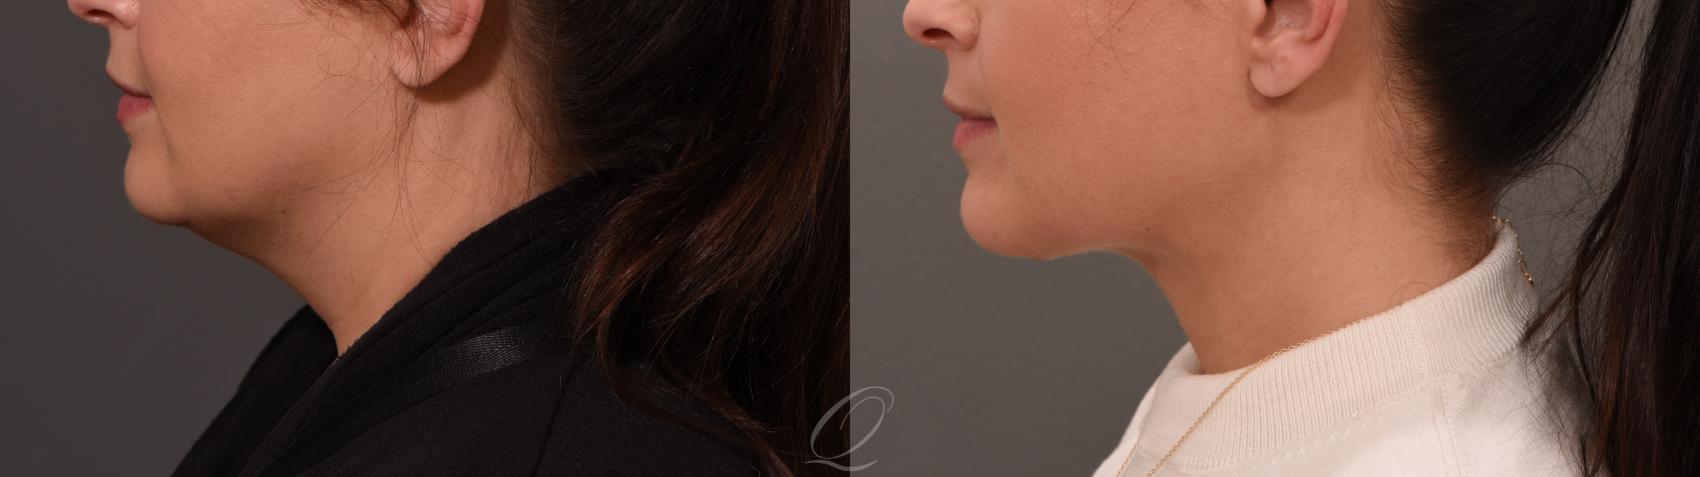 Deep Neck Contouring Case 1001558 Before & After Left Side | Serving Rochester, Syracuse & Buffalo, NY | Quatela Center for Plastic Surgery